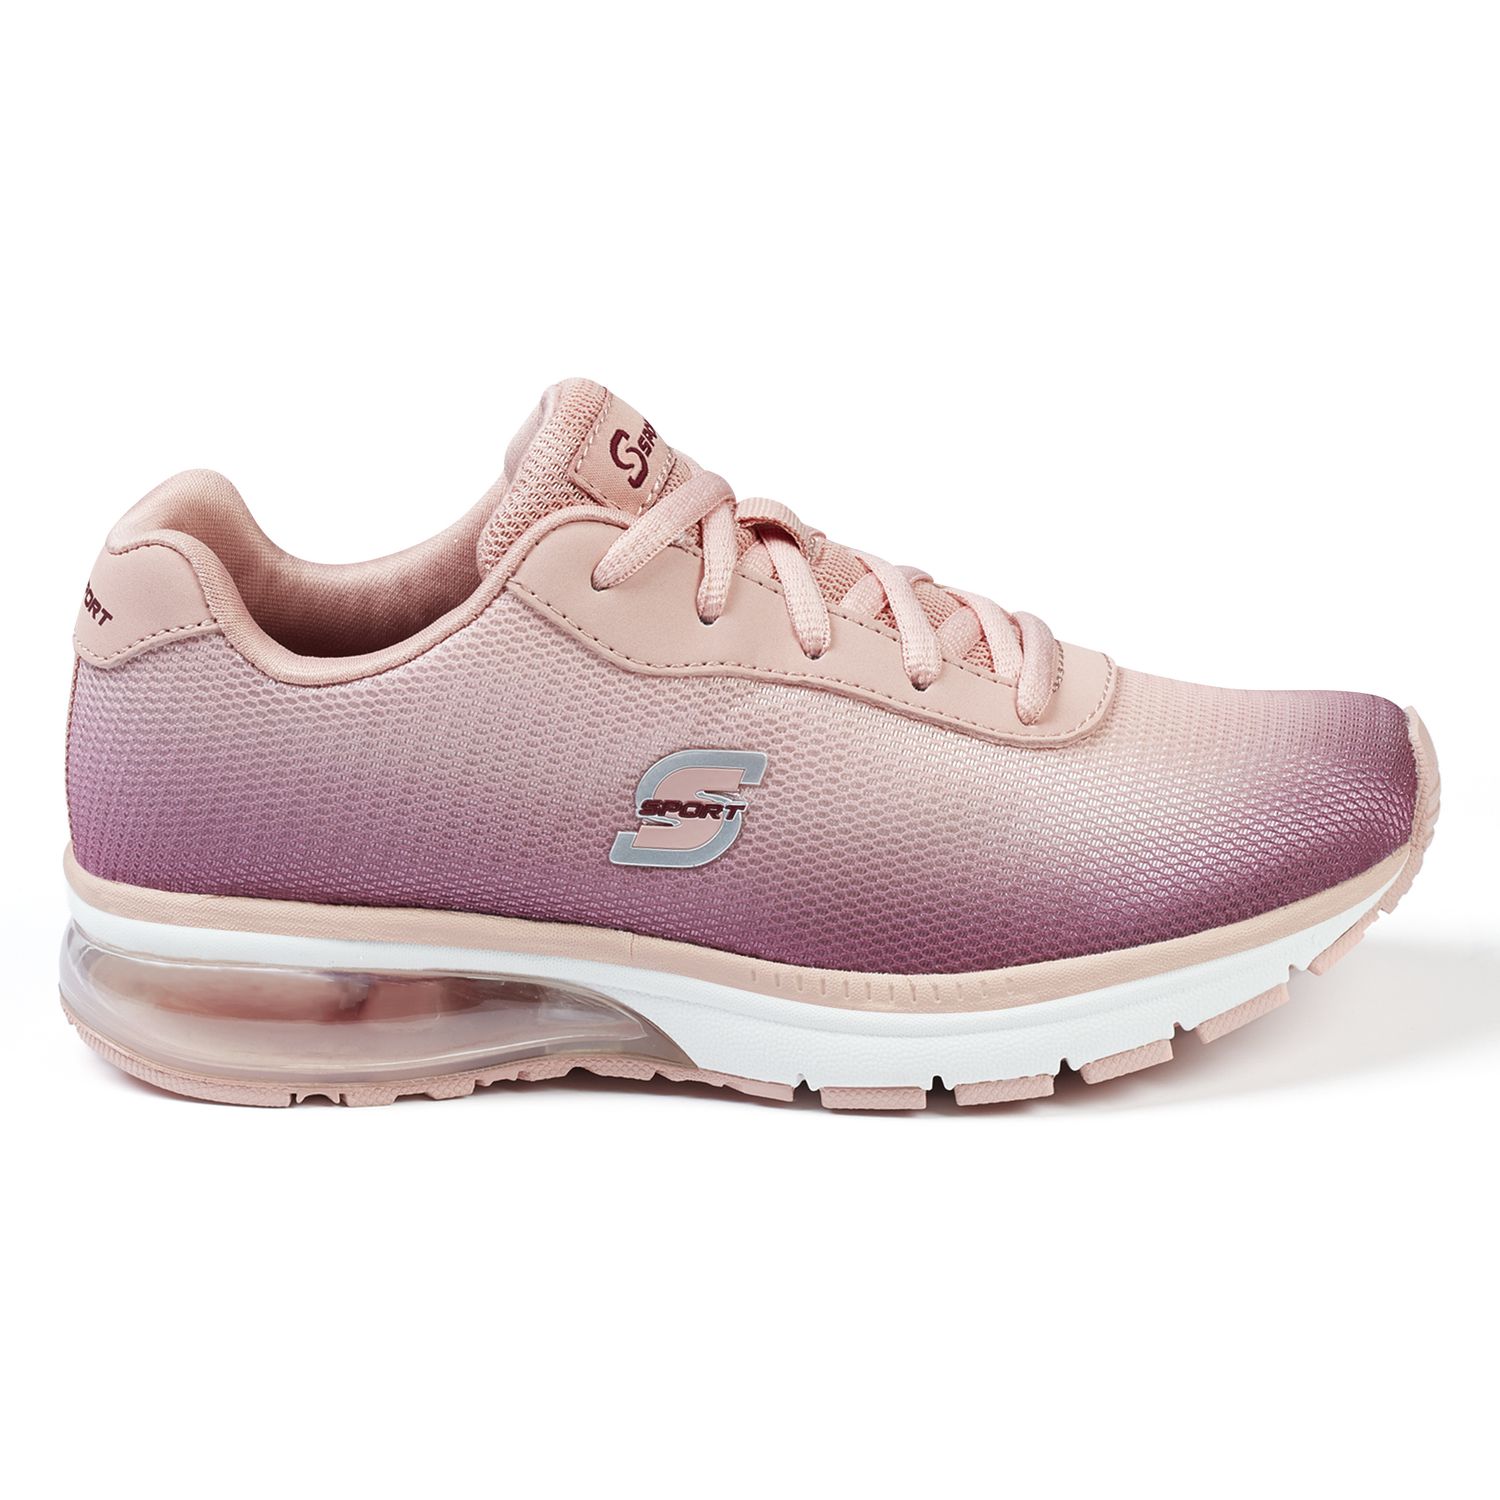 skechers lace up